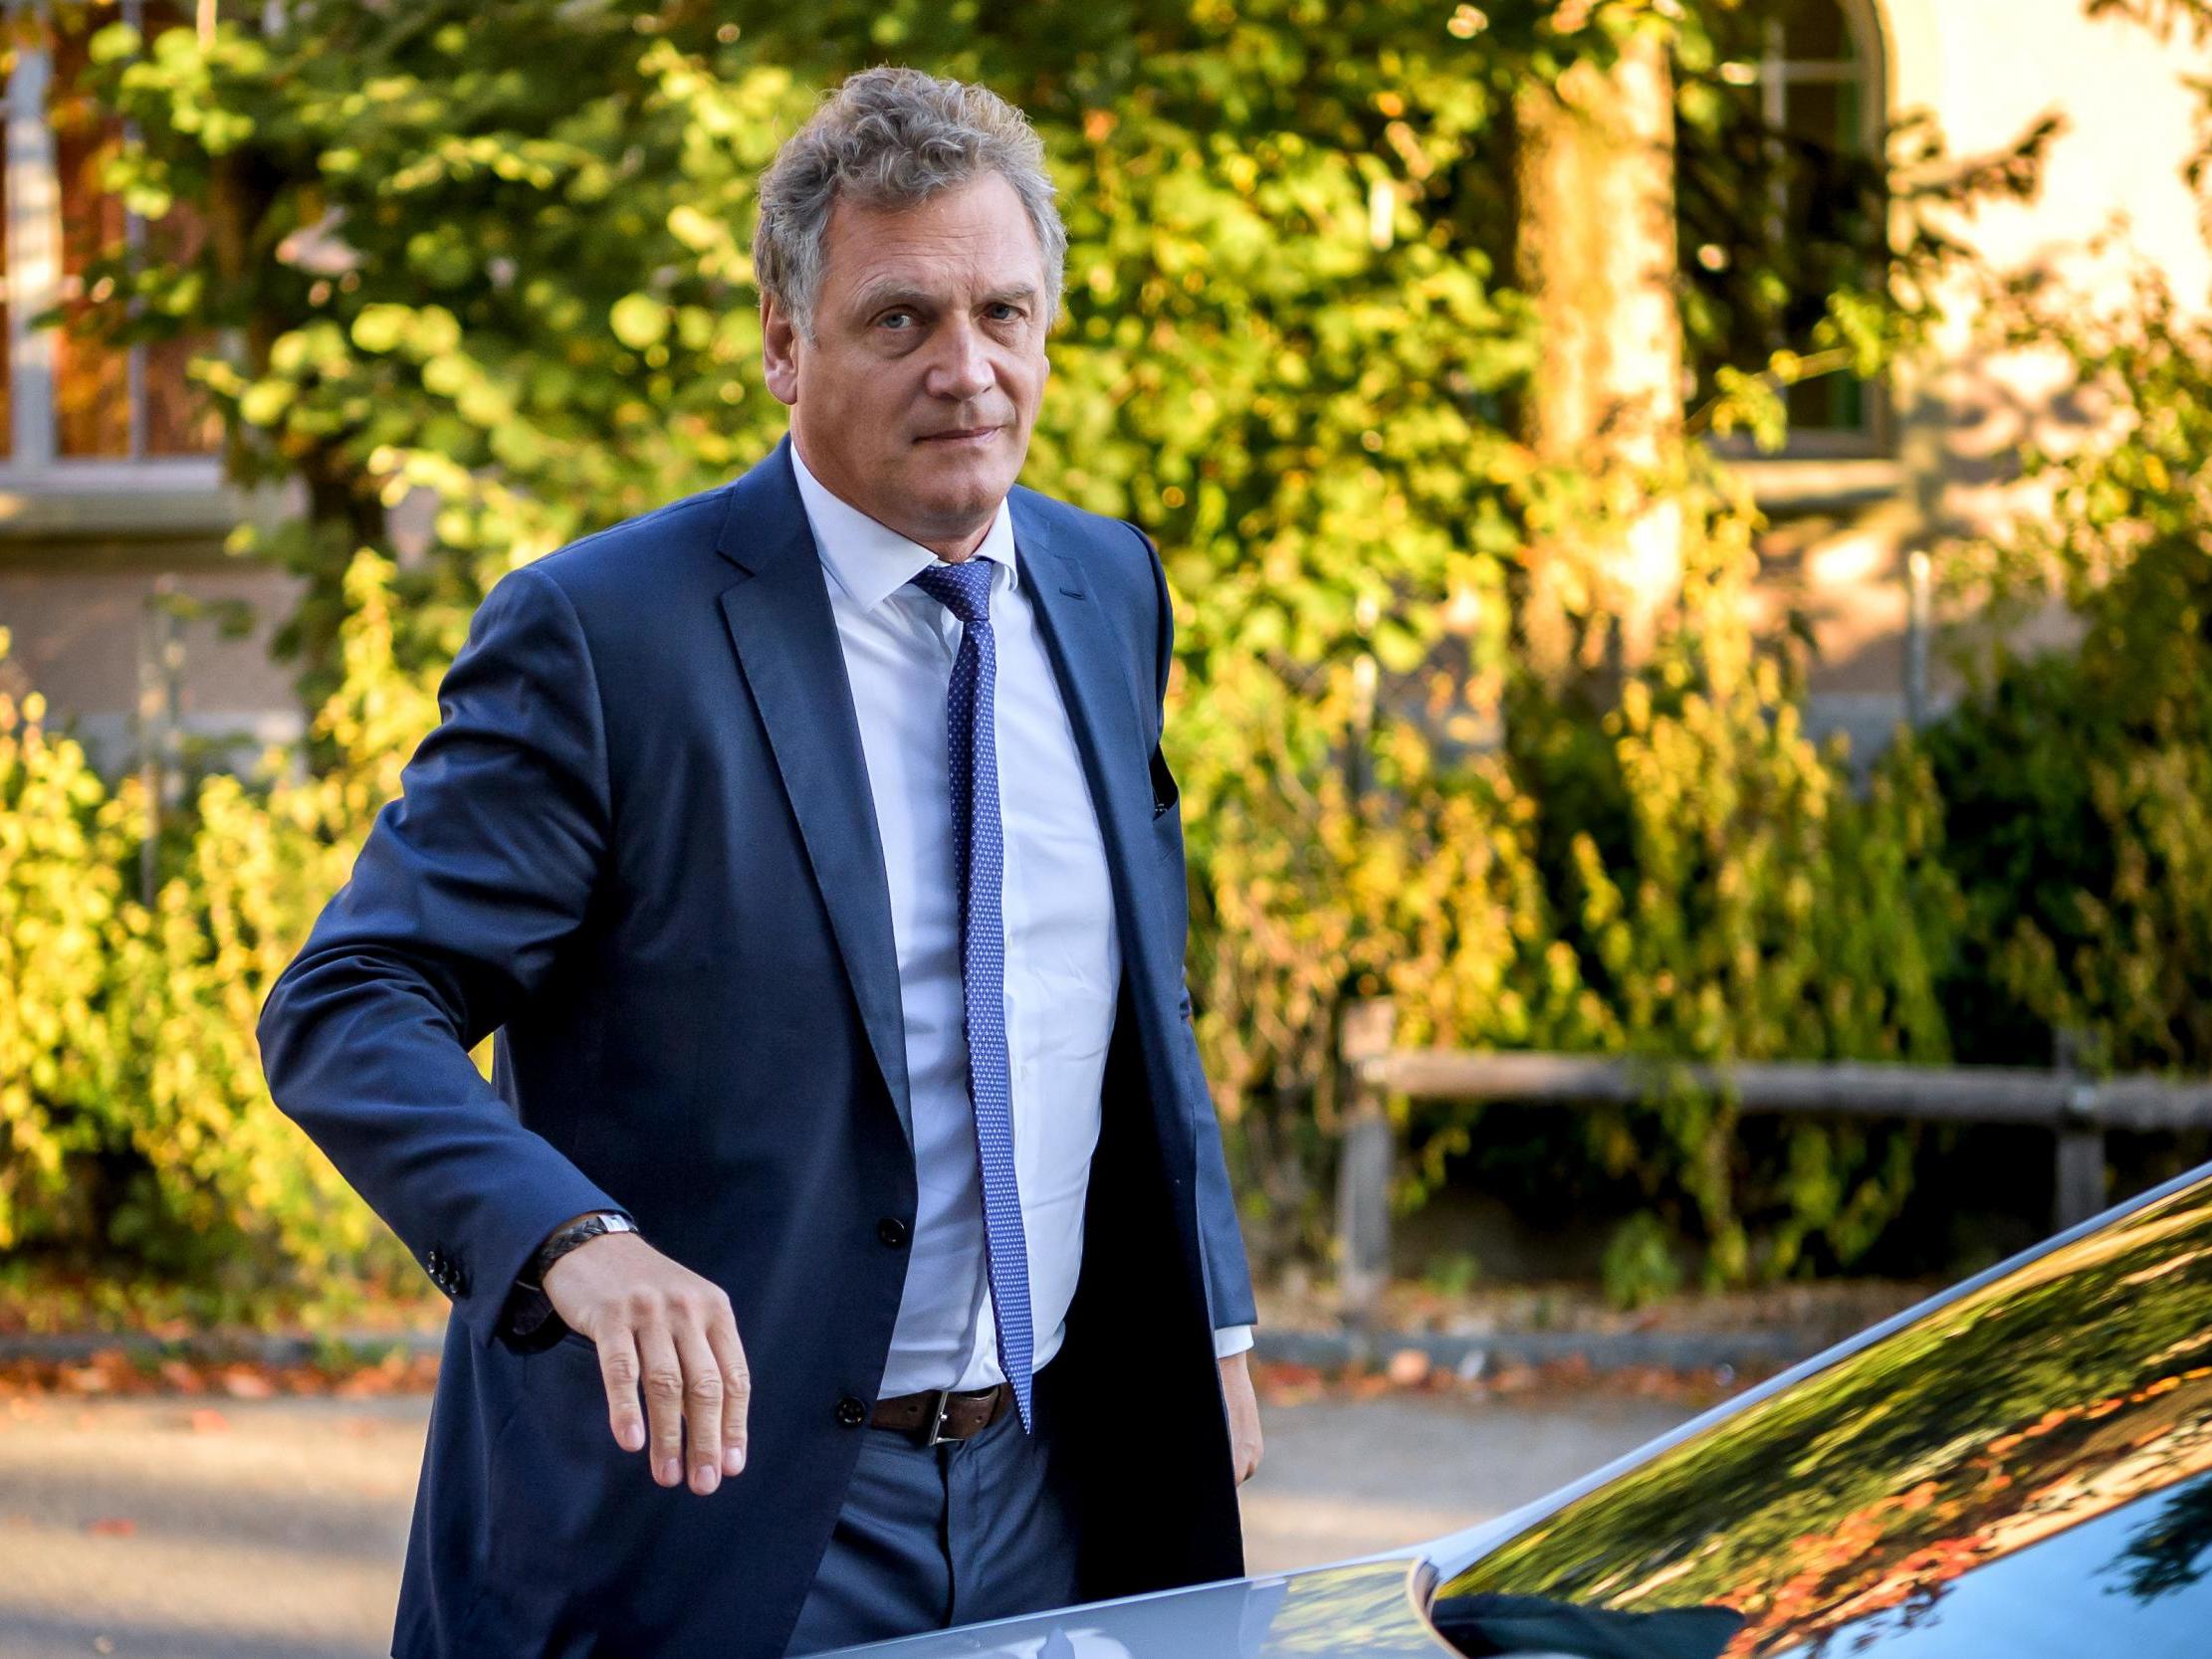 Valcke worked under Sepp Blatter at Fifa from 2003 to 2015